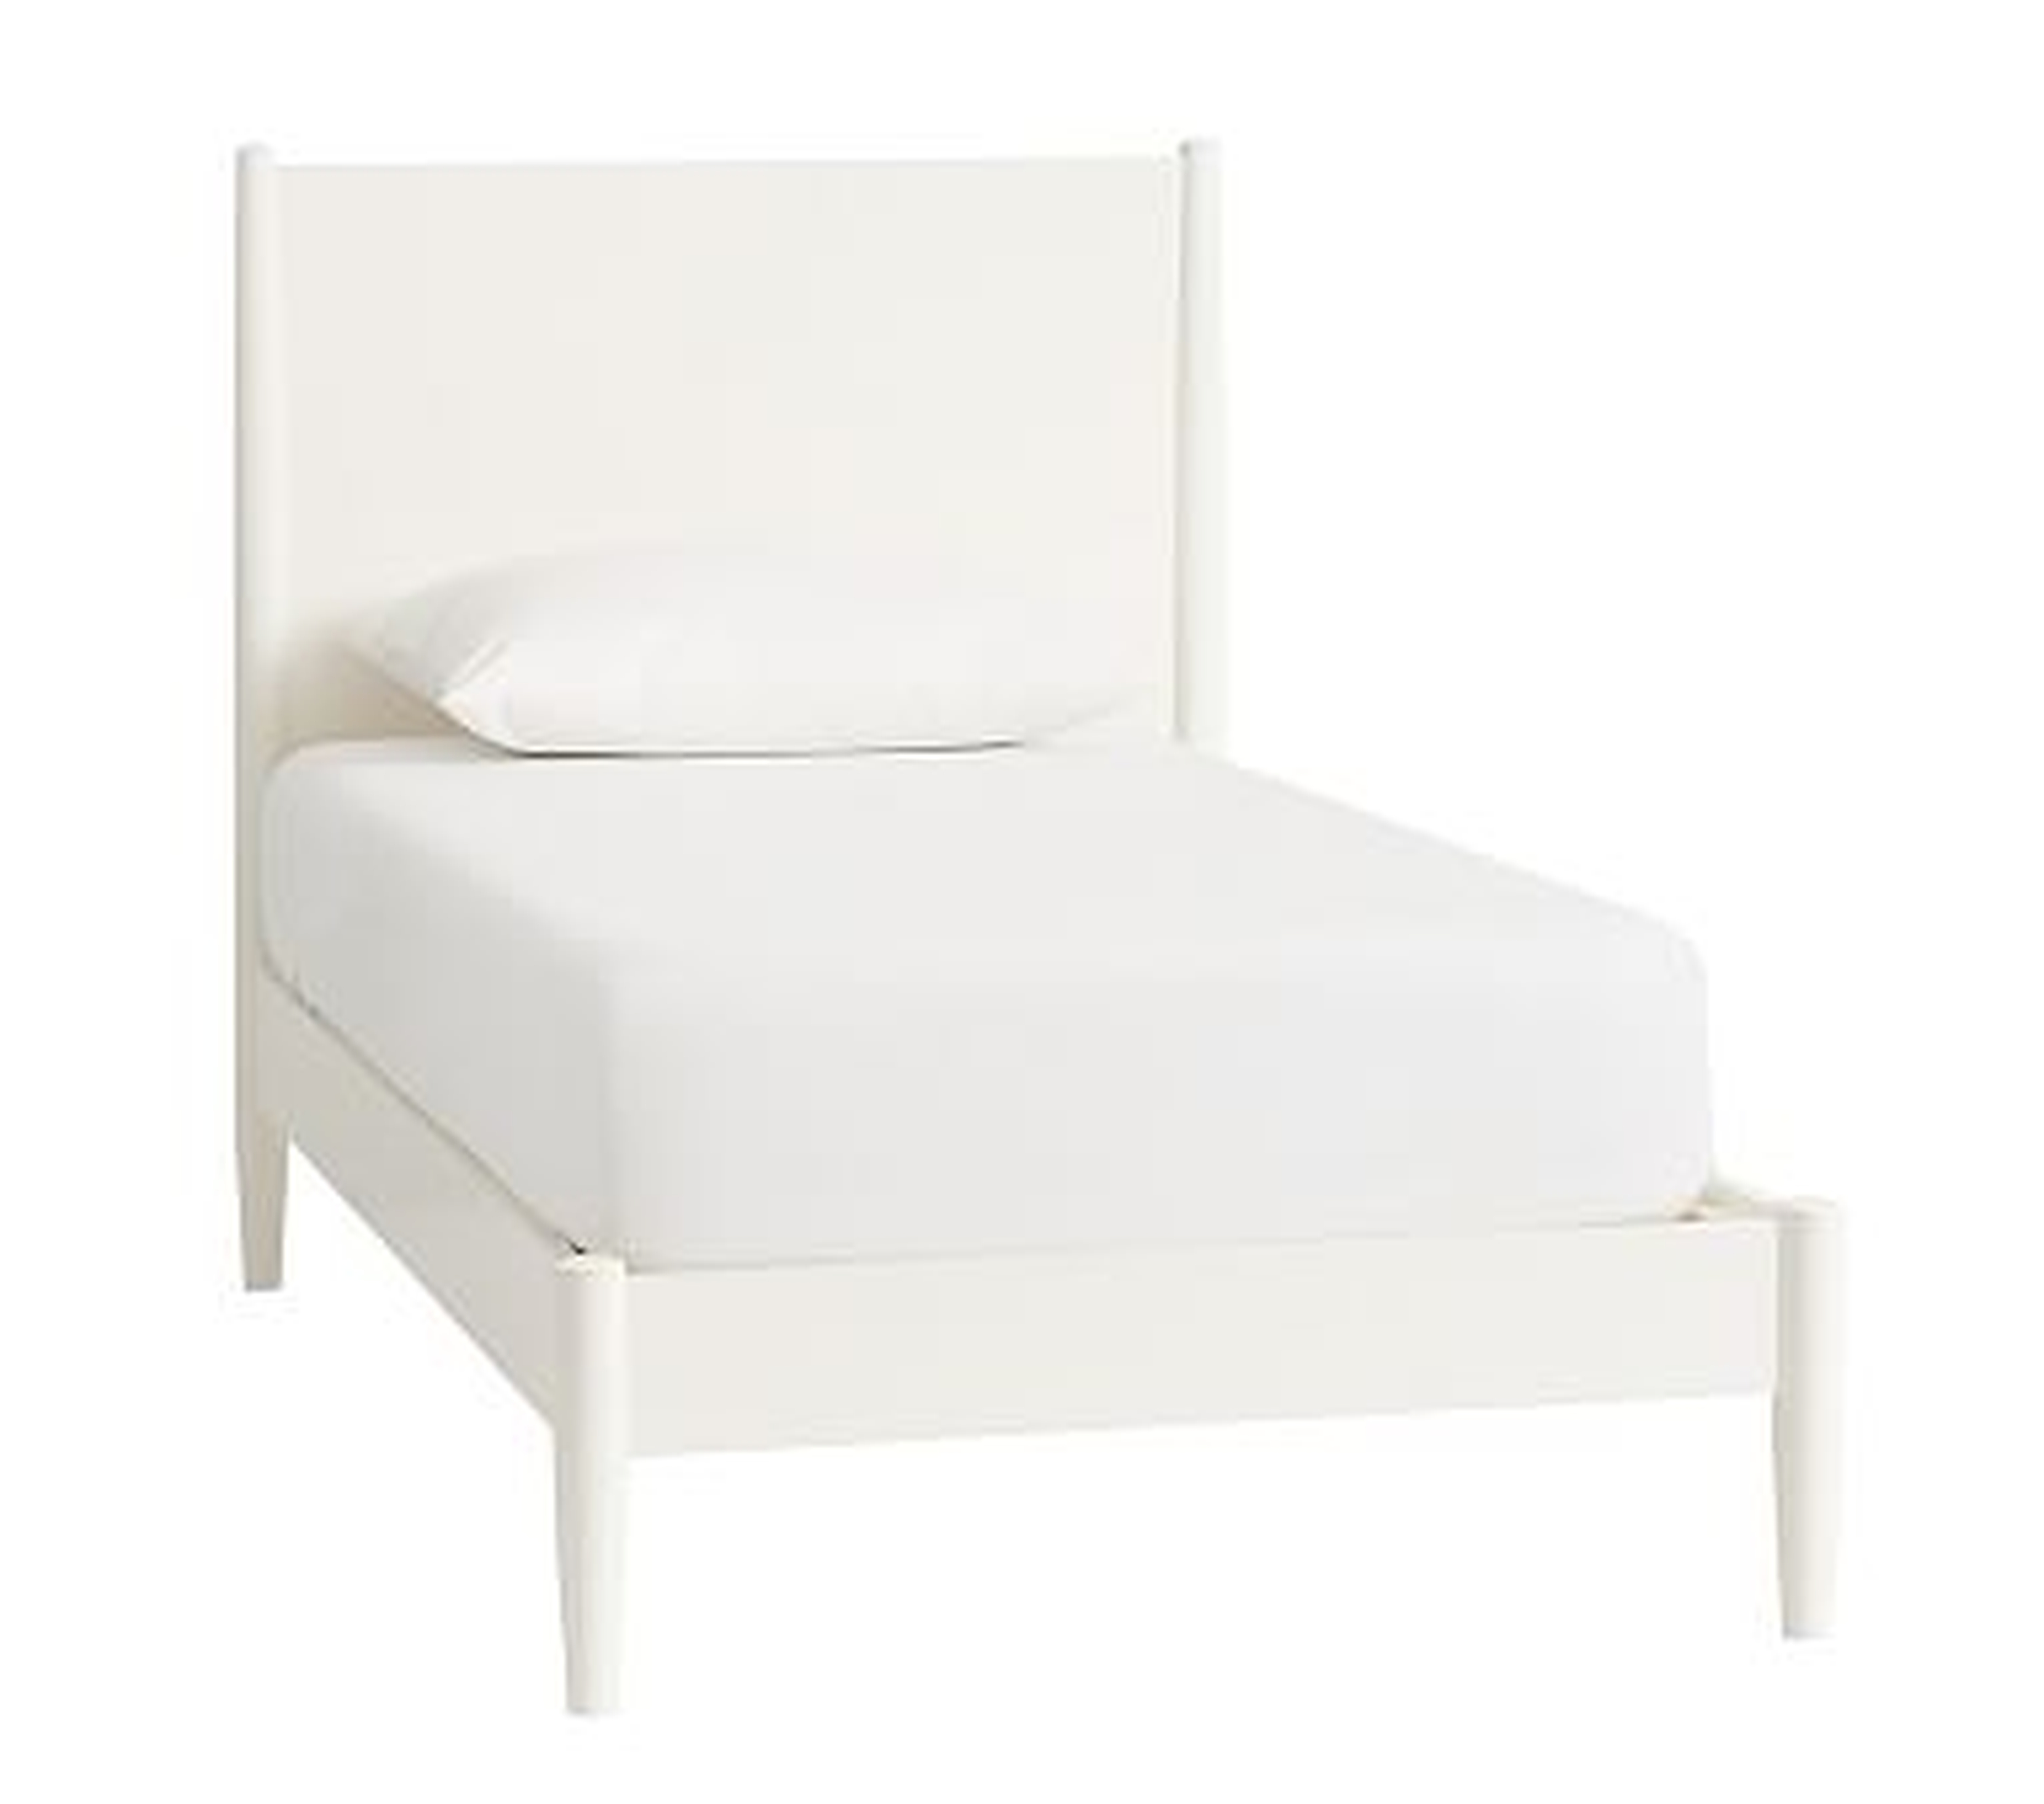 west elm x pbk Mid-Century Bed, White, Twin, Flat Rate - Pottery Barn Kids